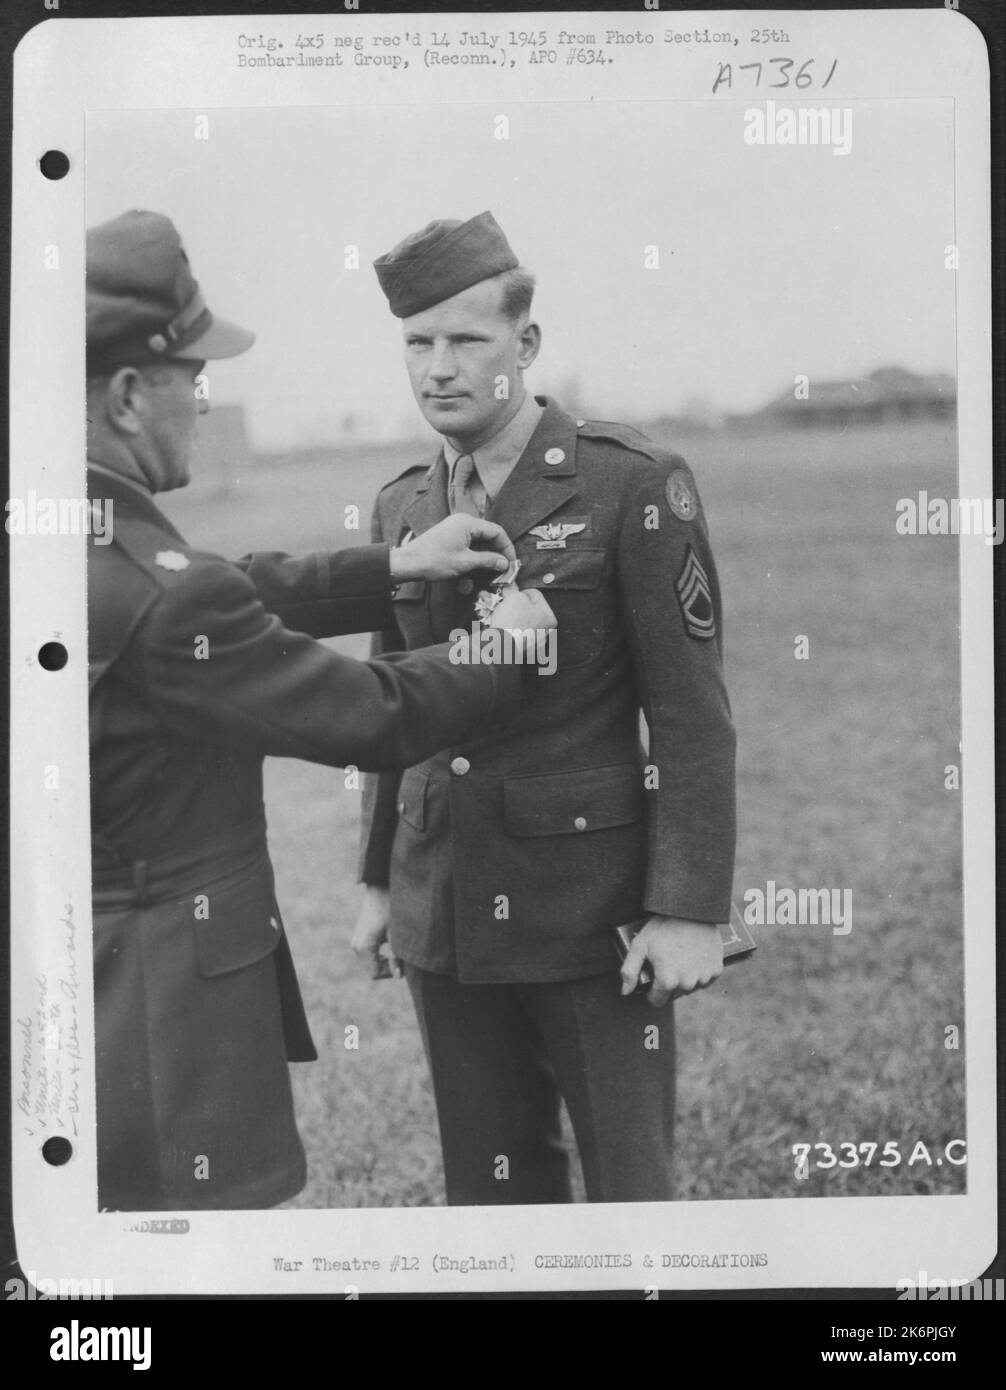 T/Sgt. W.H. Bowles Of The 652Nd Weather Reconnaissance Squadron, 25Th Weather Reconnaissance Group, Is Presented The Air Medal At An 8Th Air Force Base In England. 10 June 1944. Stock Photo